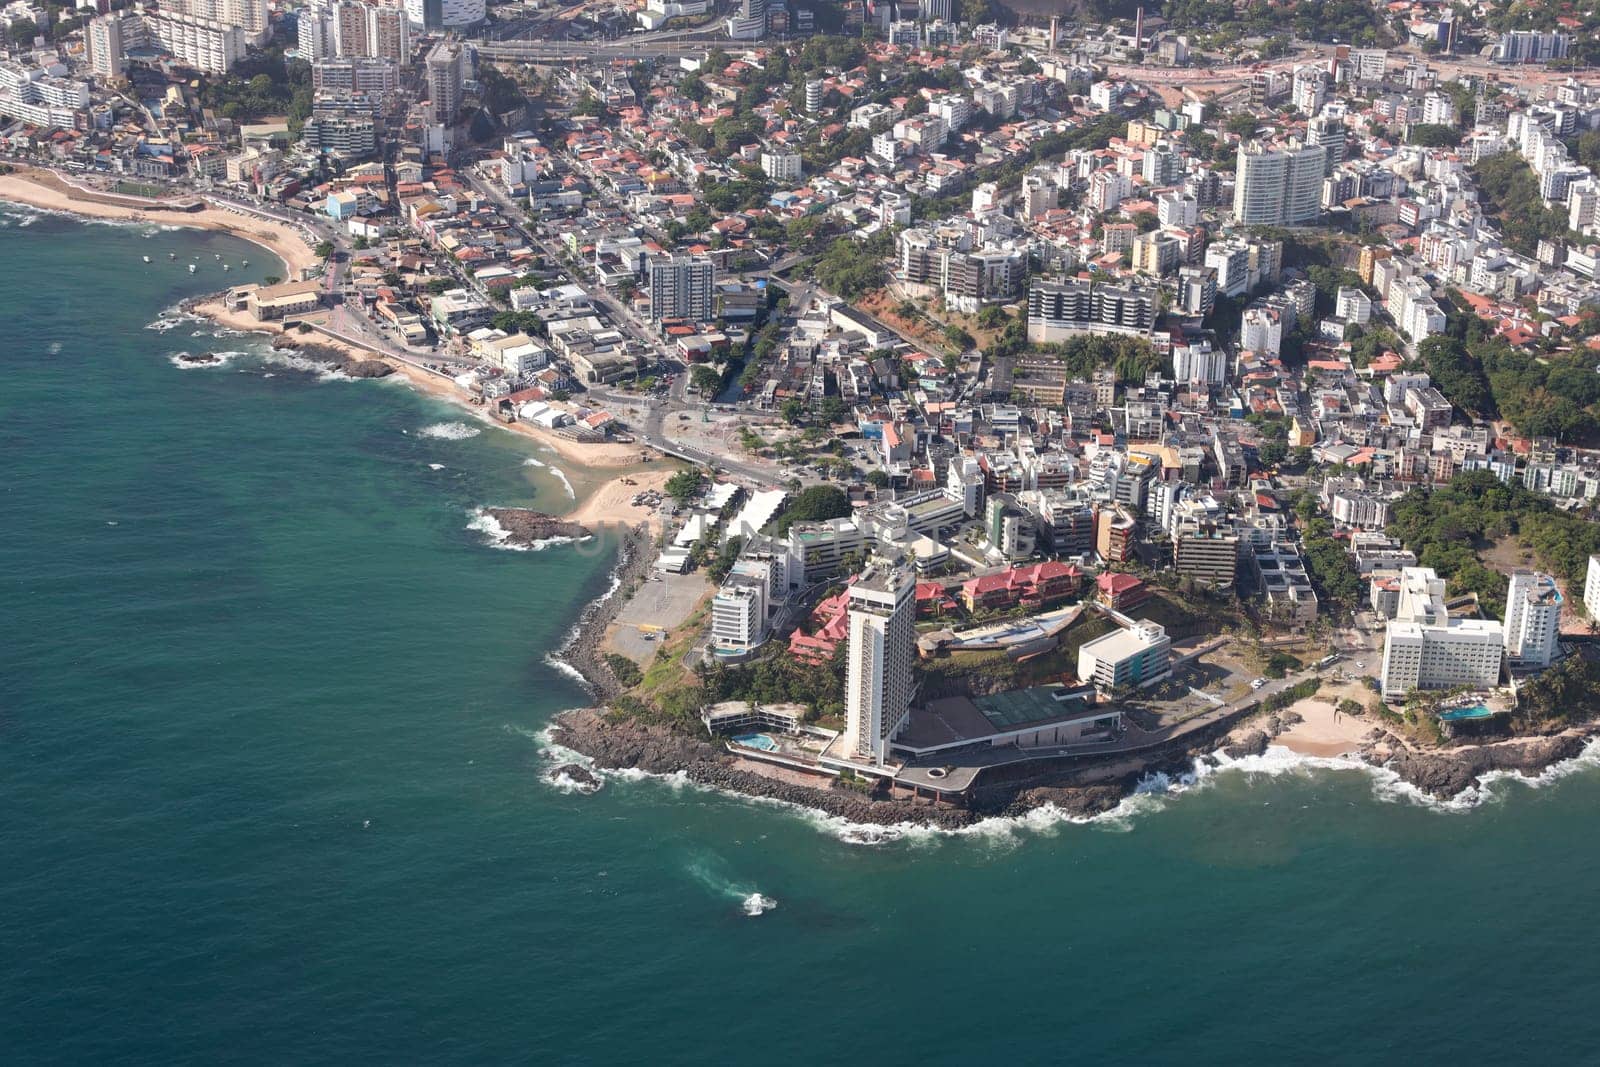 aerial view of the city of Salvador by joasouza